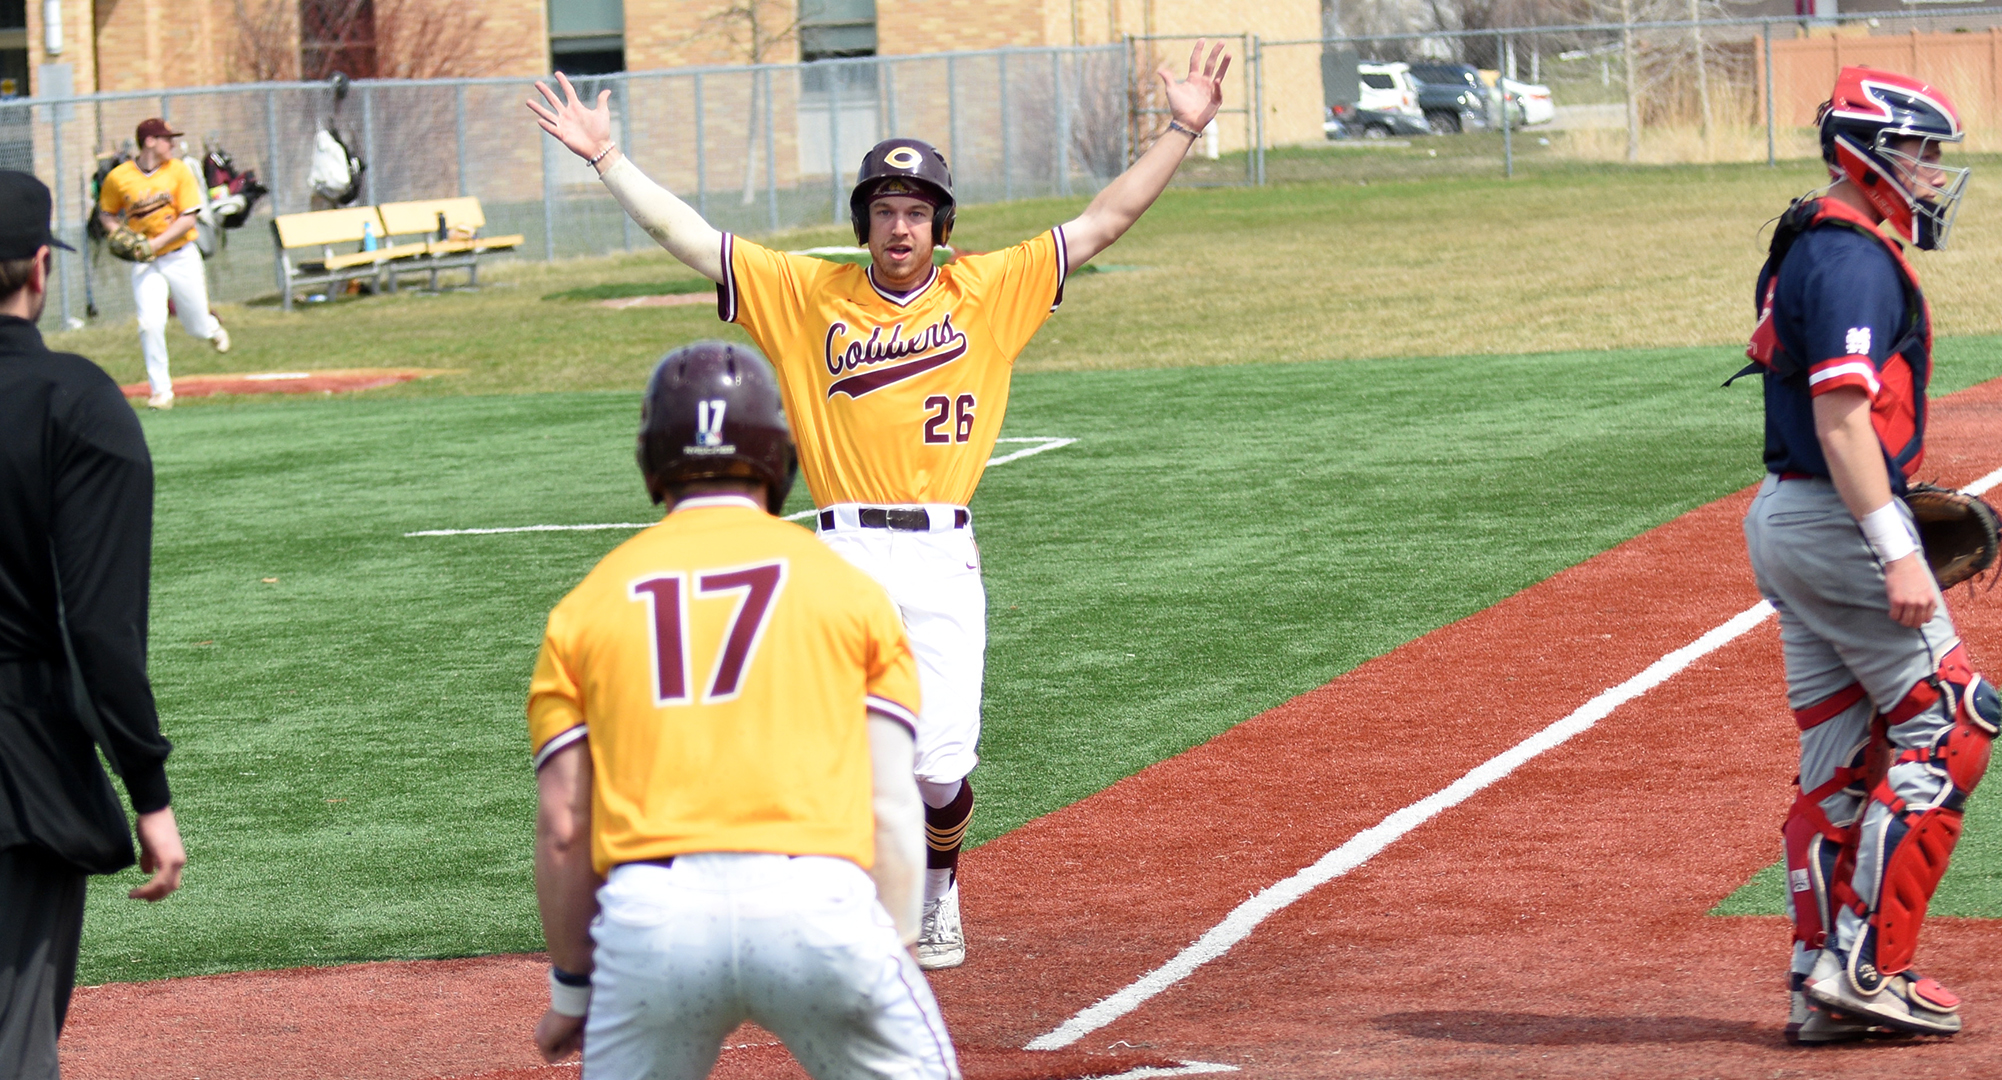 Noah Pilon raises his arms to celebrate scoring the game-winning run in the Cobbers 3-2 victory over St. Mary's in the opener of the DH.